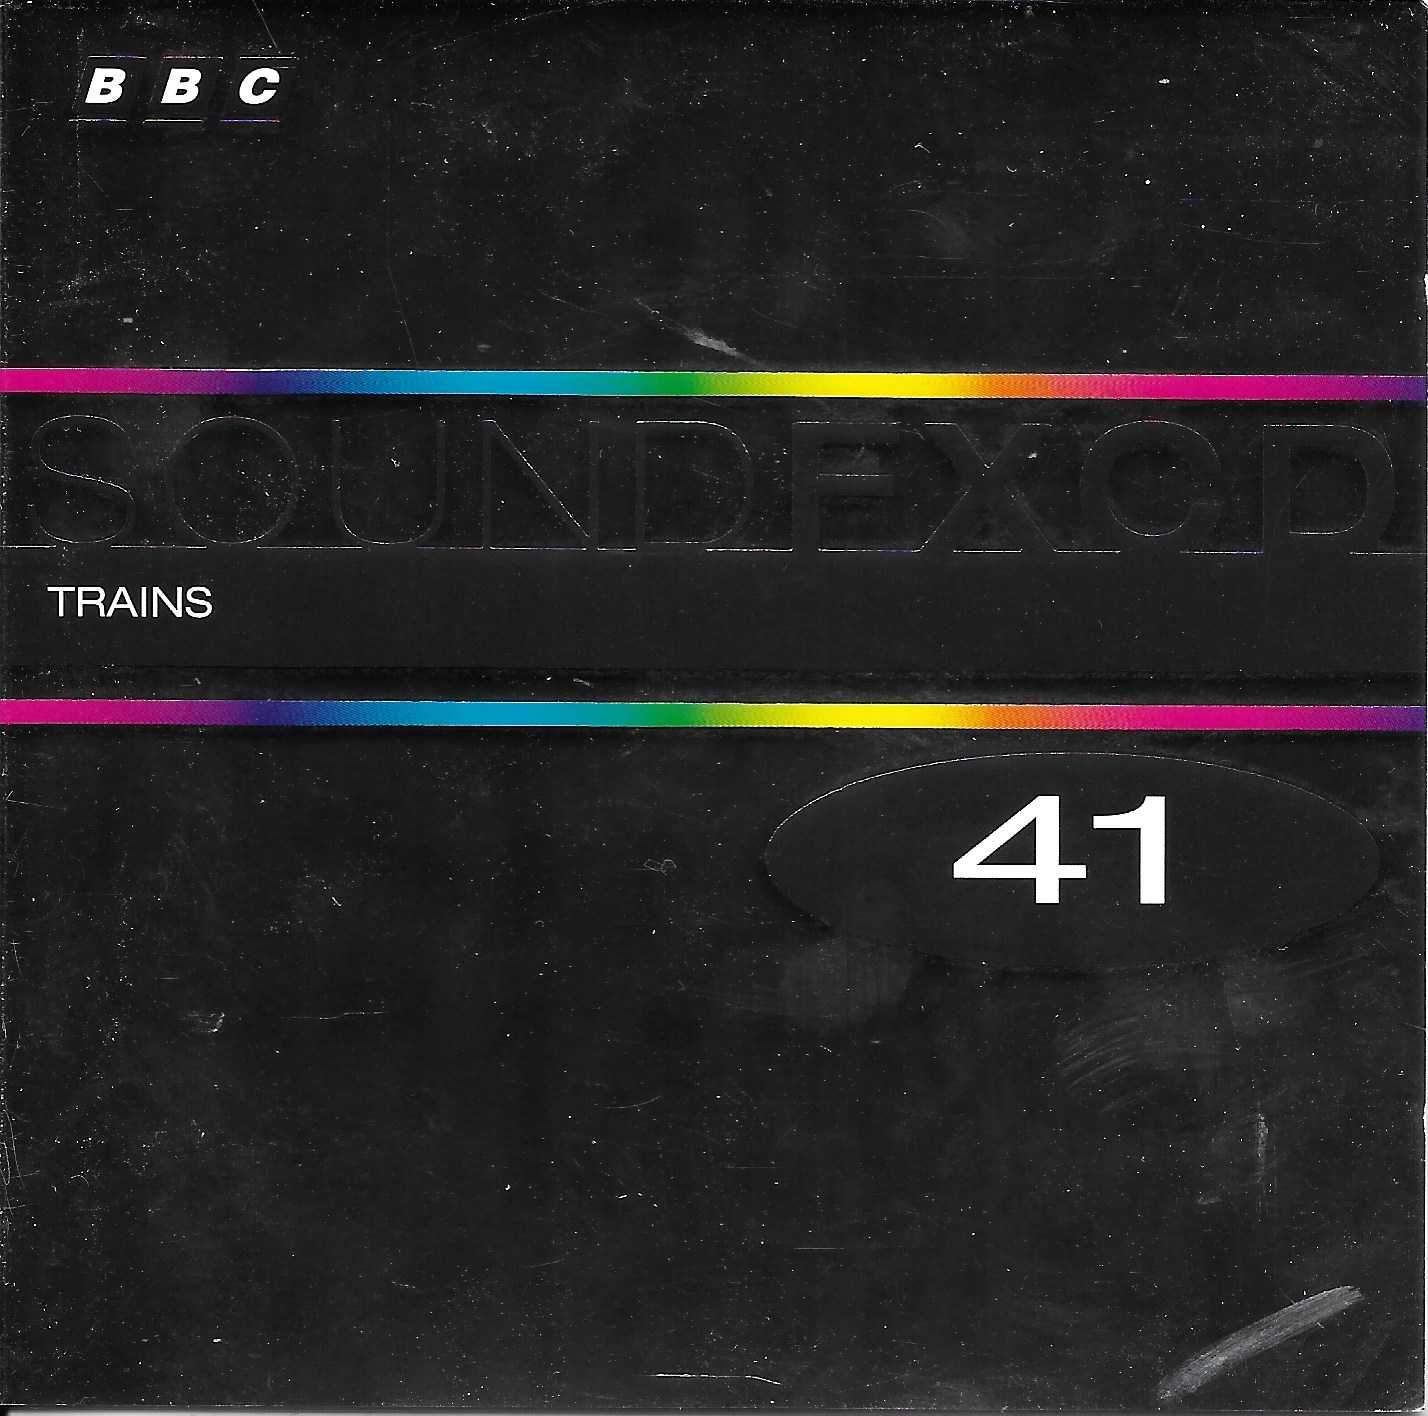 Picture of BBCCD SFX041 Trains by artist Various from the BBC records and Tapes library